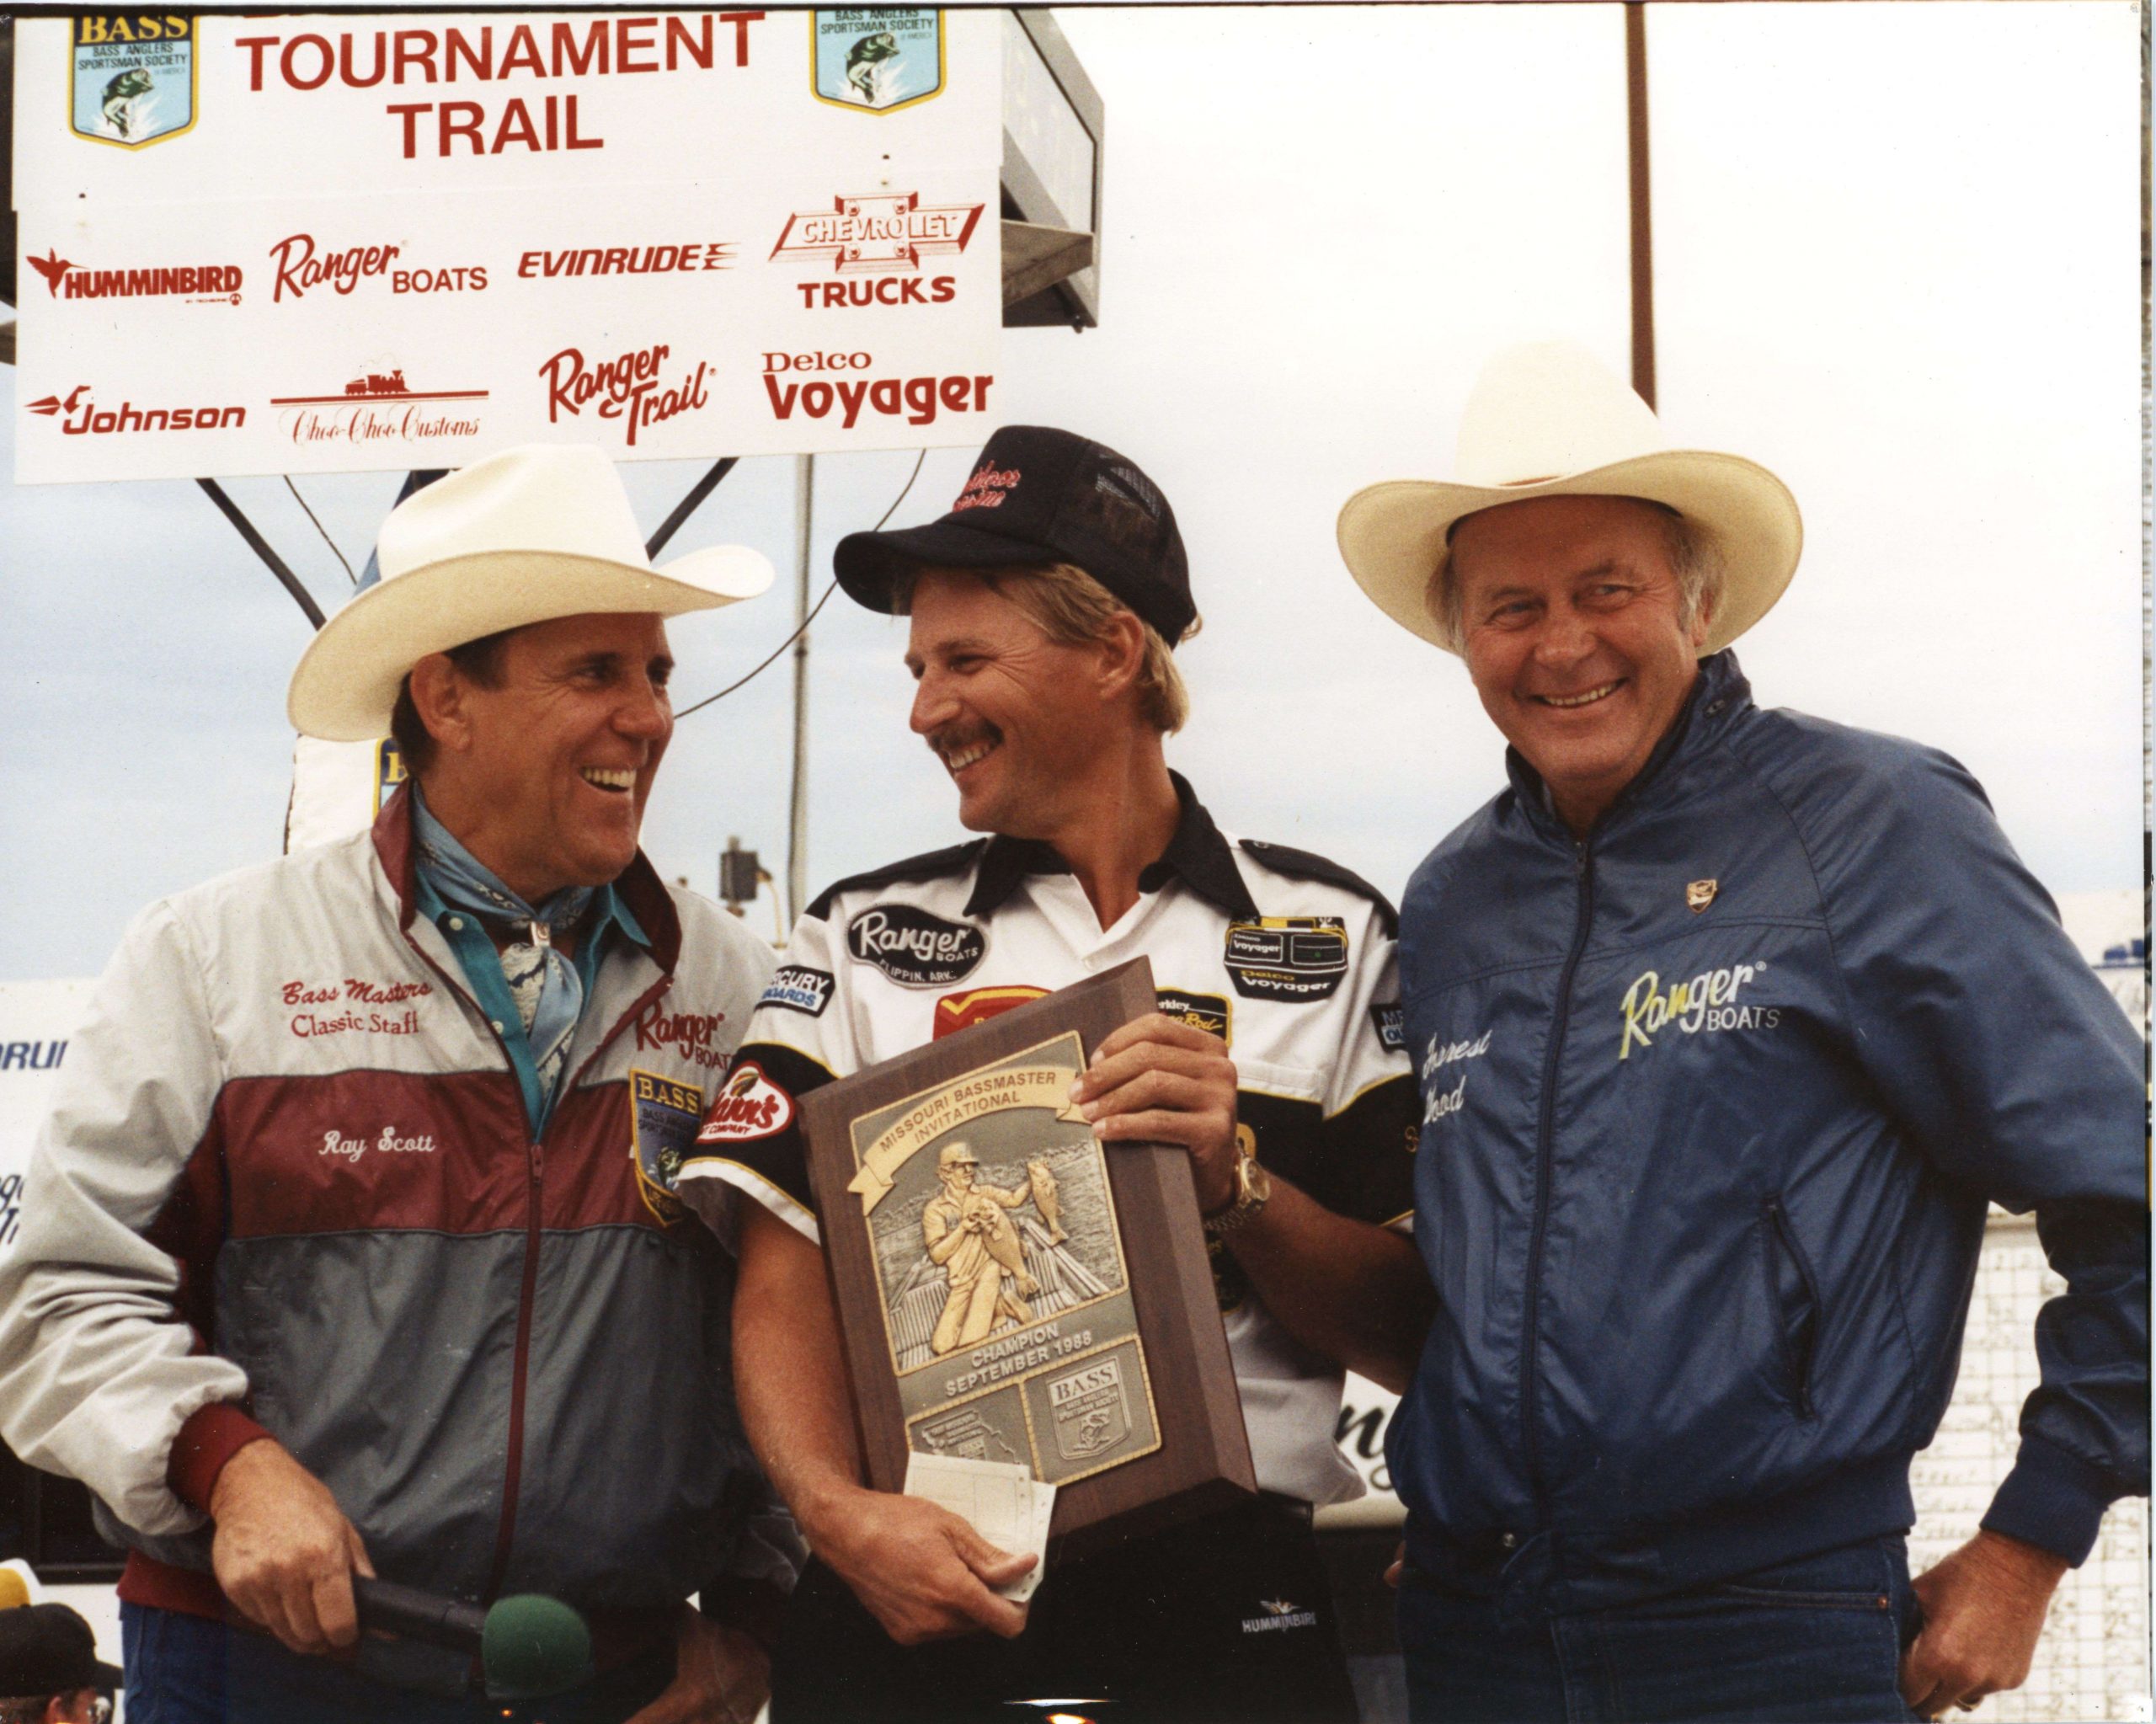 Wood and his wife Nina both attended the tournaments. Part of what they enjoyed the most was visiting with the anglers. Here, Wood poses with Ray Scott and Hank Parker, winner of the 1988 Missouri Invitational. 